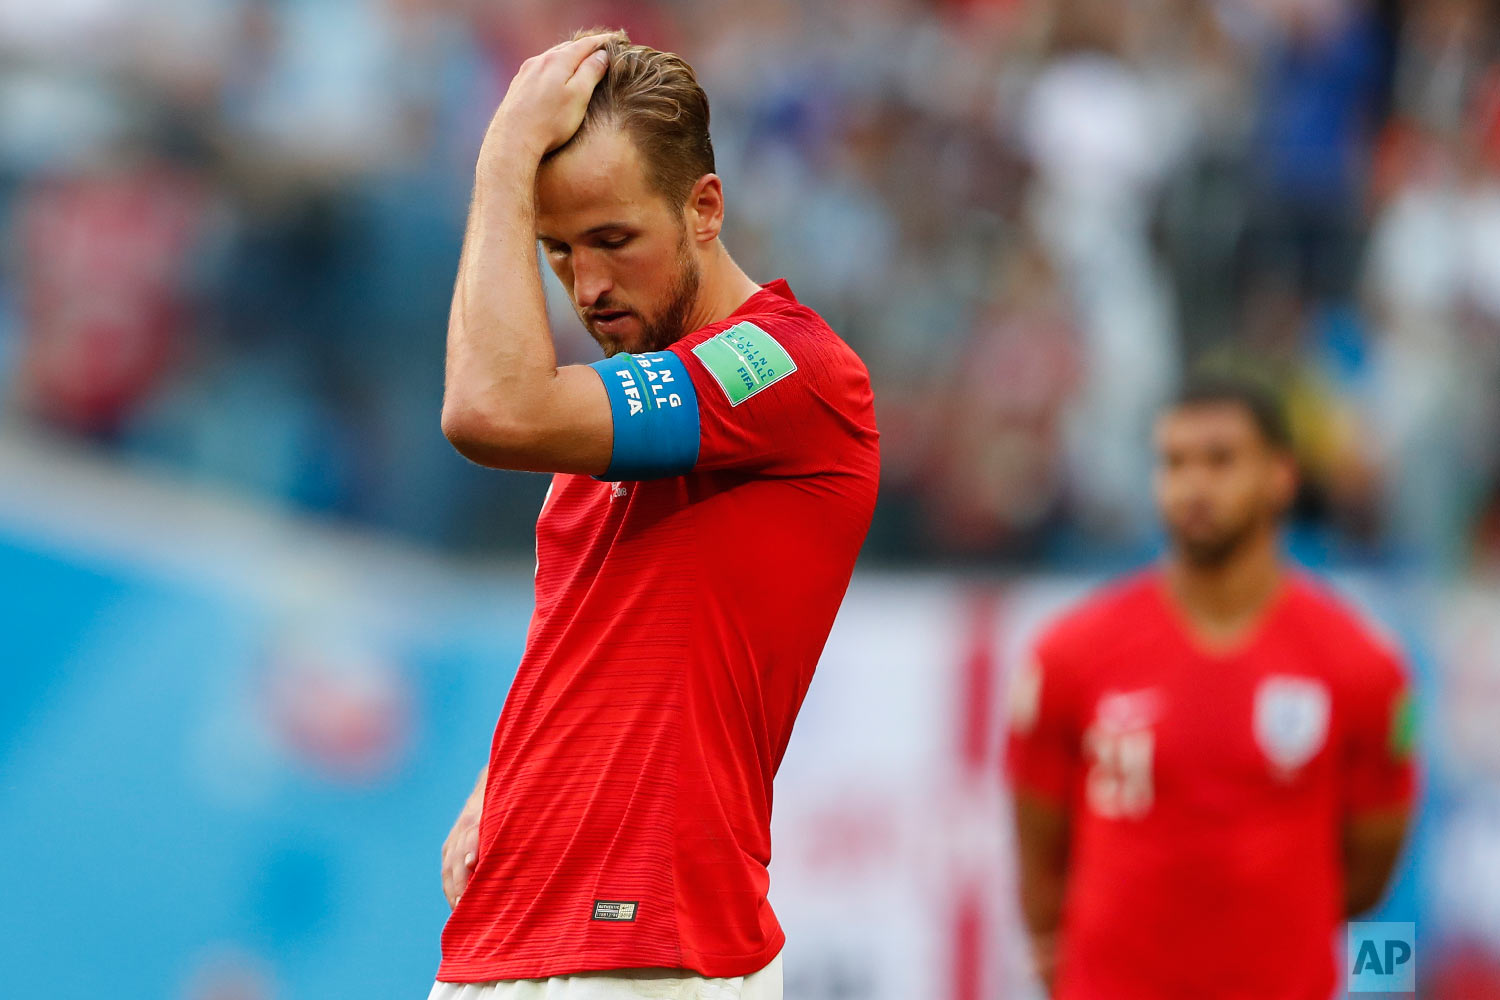  England's Harry Kane reacts after the third place match between England and Belgium at the 2018 soccer World Cup in the St. Petersburg Stadium in St. Petersburg, Russia, Saturday, July 14, 2018. (AP Photo/Natacha Pisarenko) 